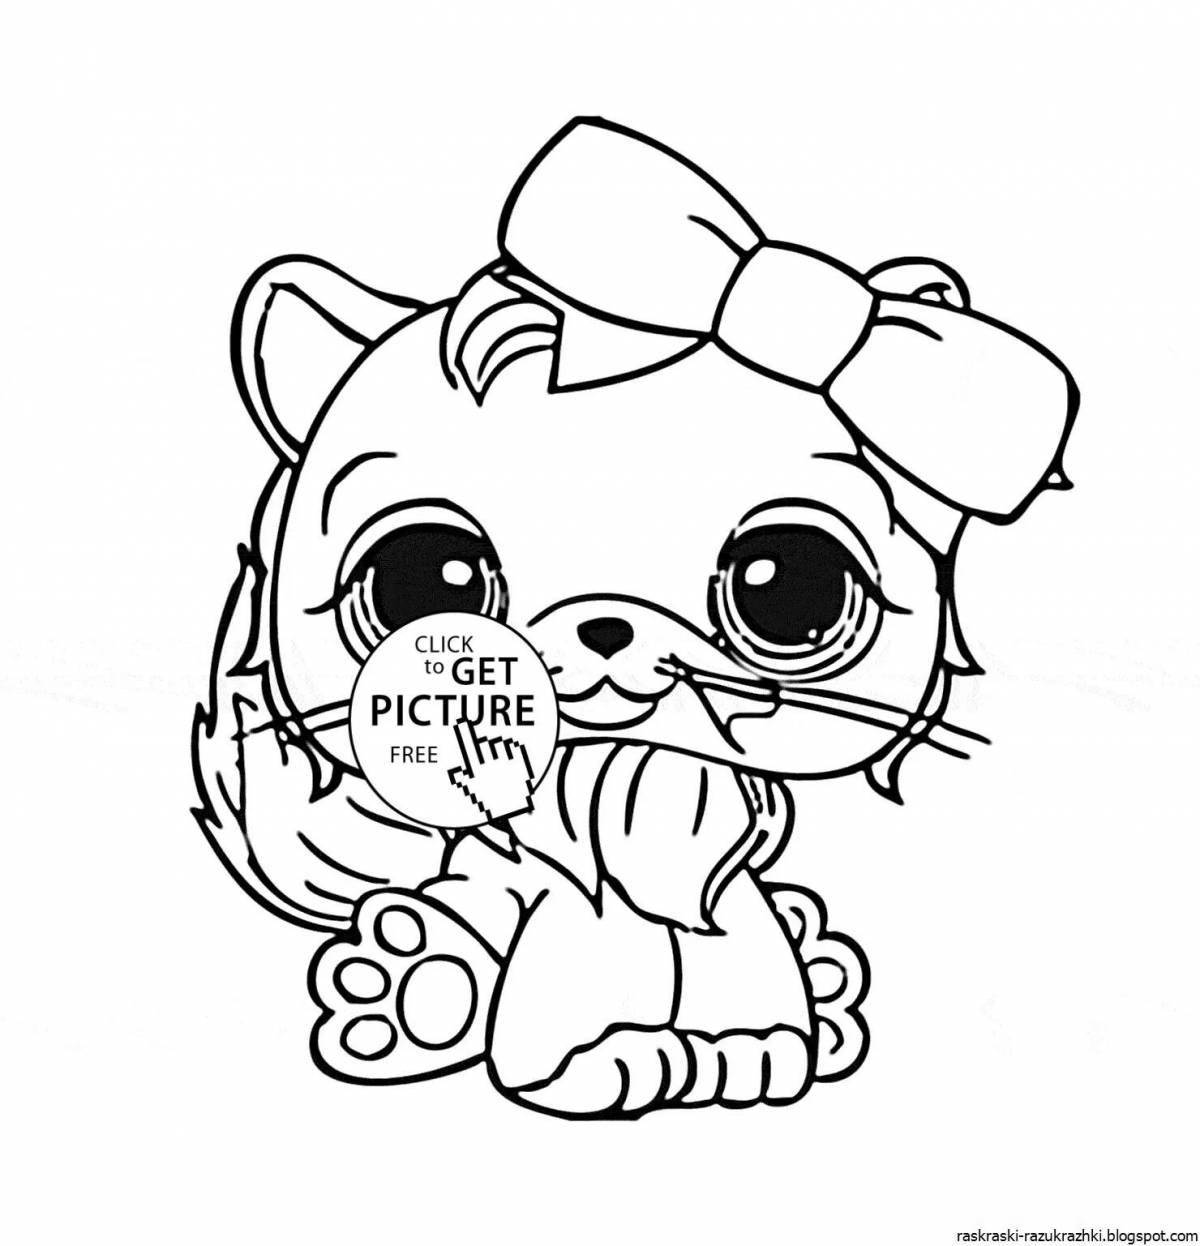 Radiant coloring page lol for girls animals